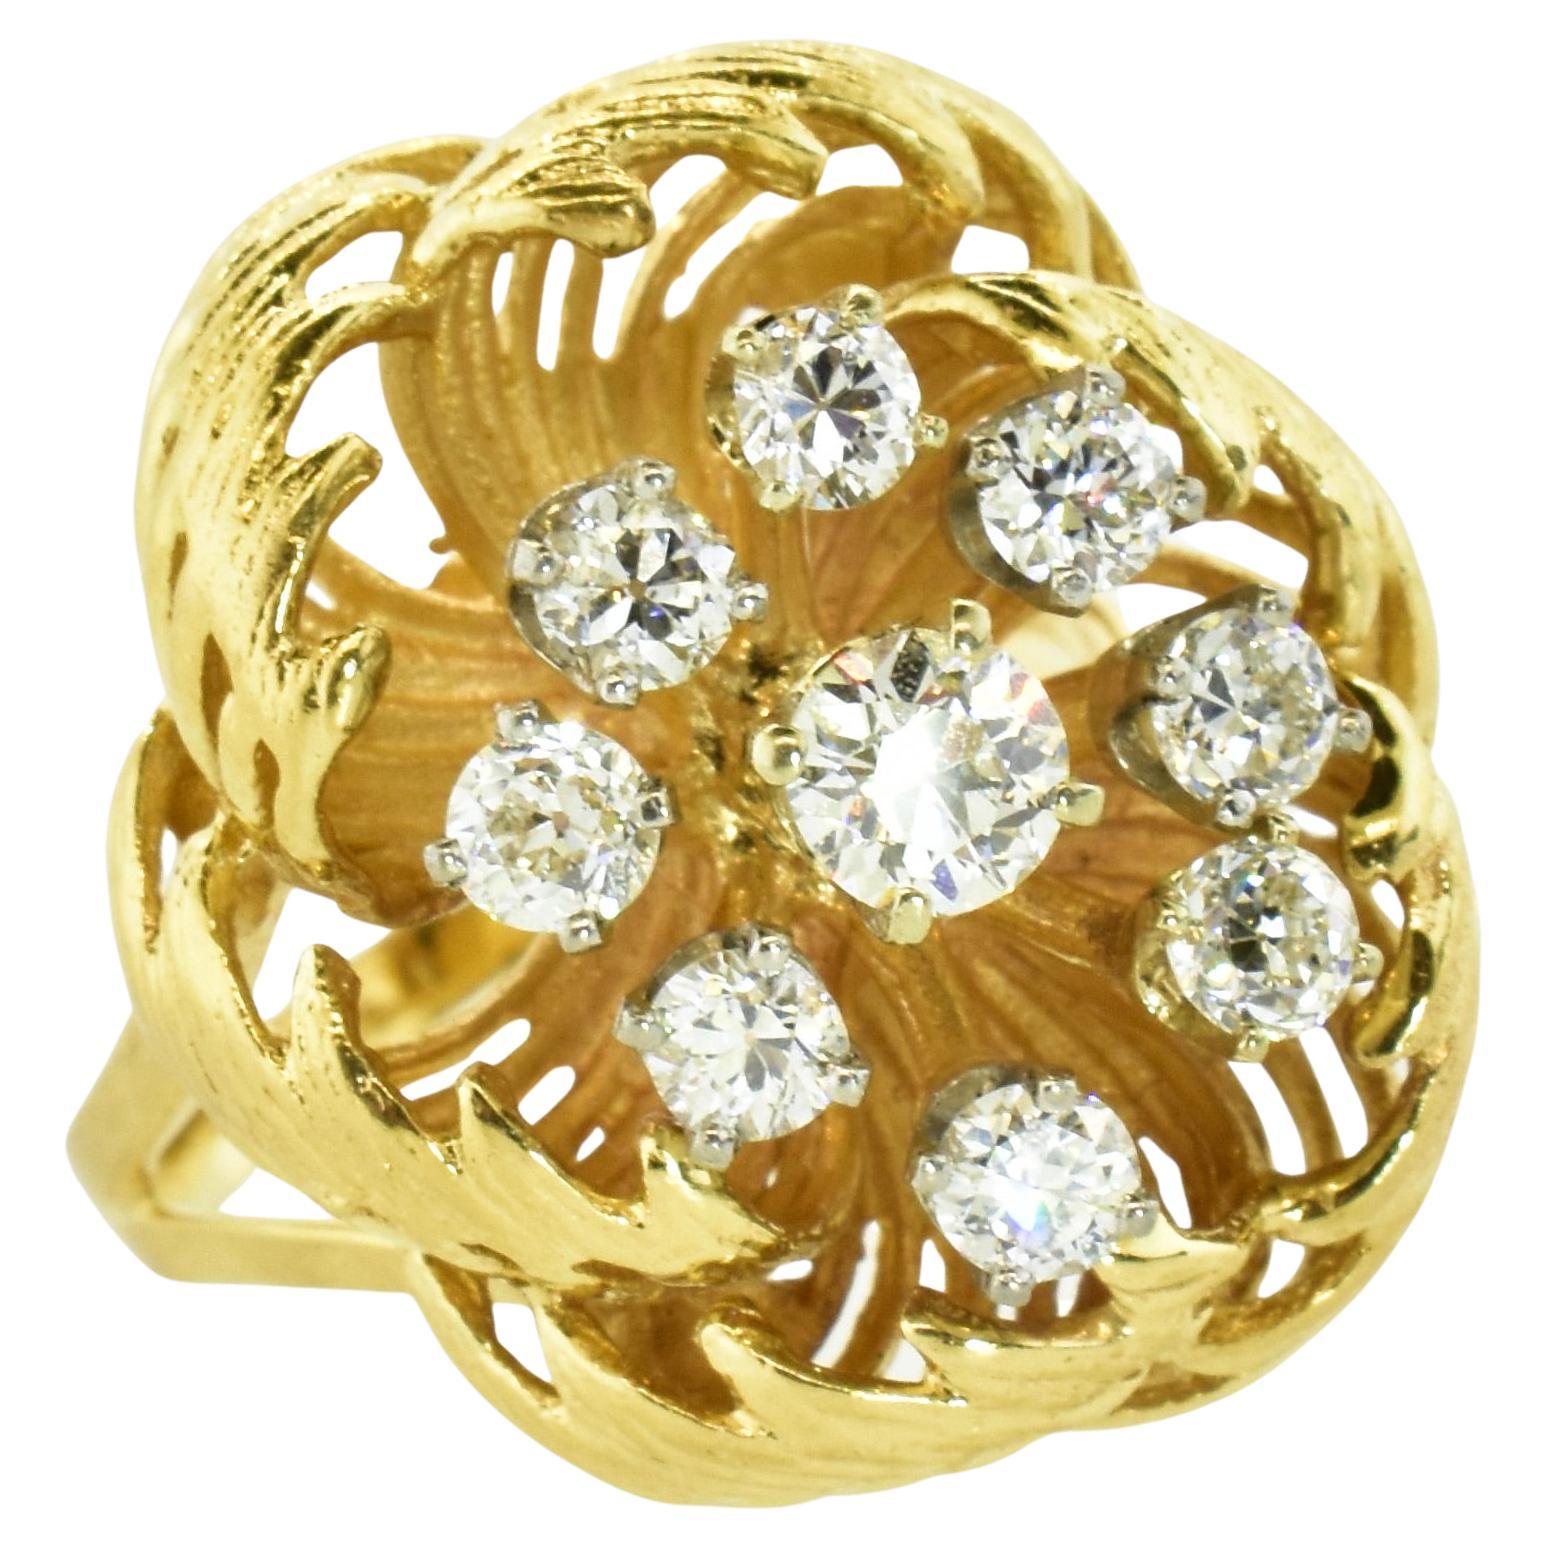 This large yellow gold ring with a flower motif possesses 9 well cut round brilliant cut diamonds prong set in white gold.  These diamonds weigh an estimated 1.35 cts., and are near colorless (H), and very slightly included (VS).  This ring weighs